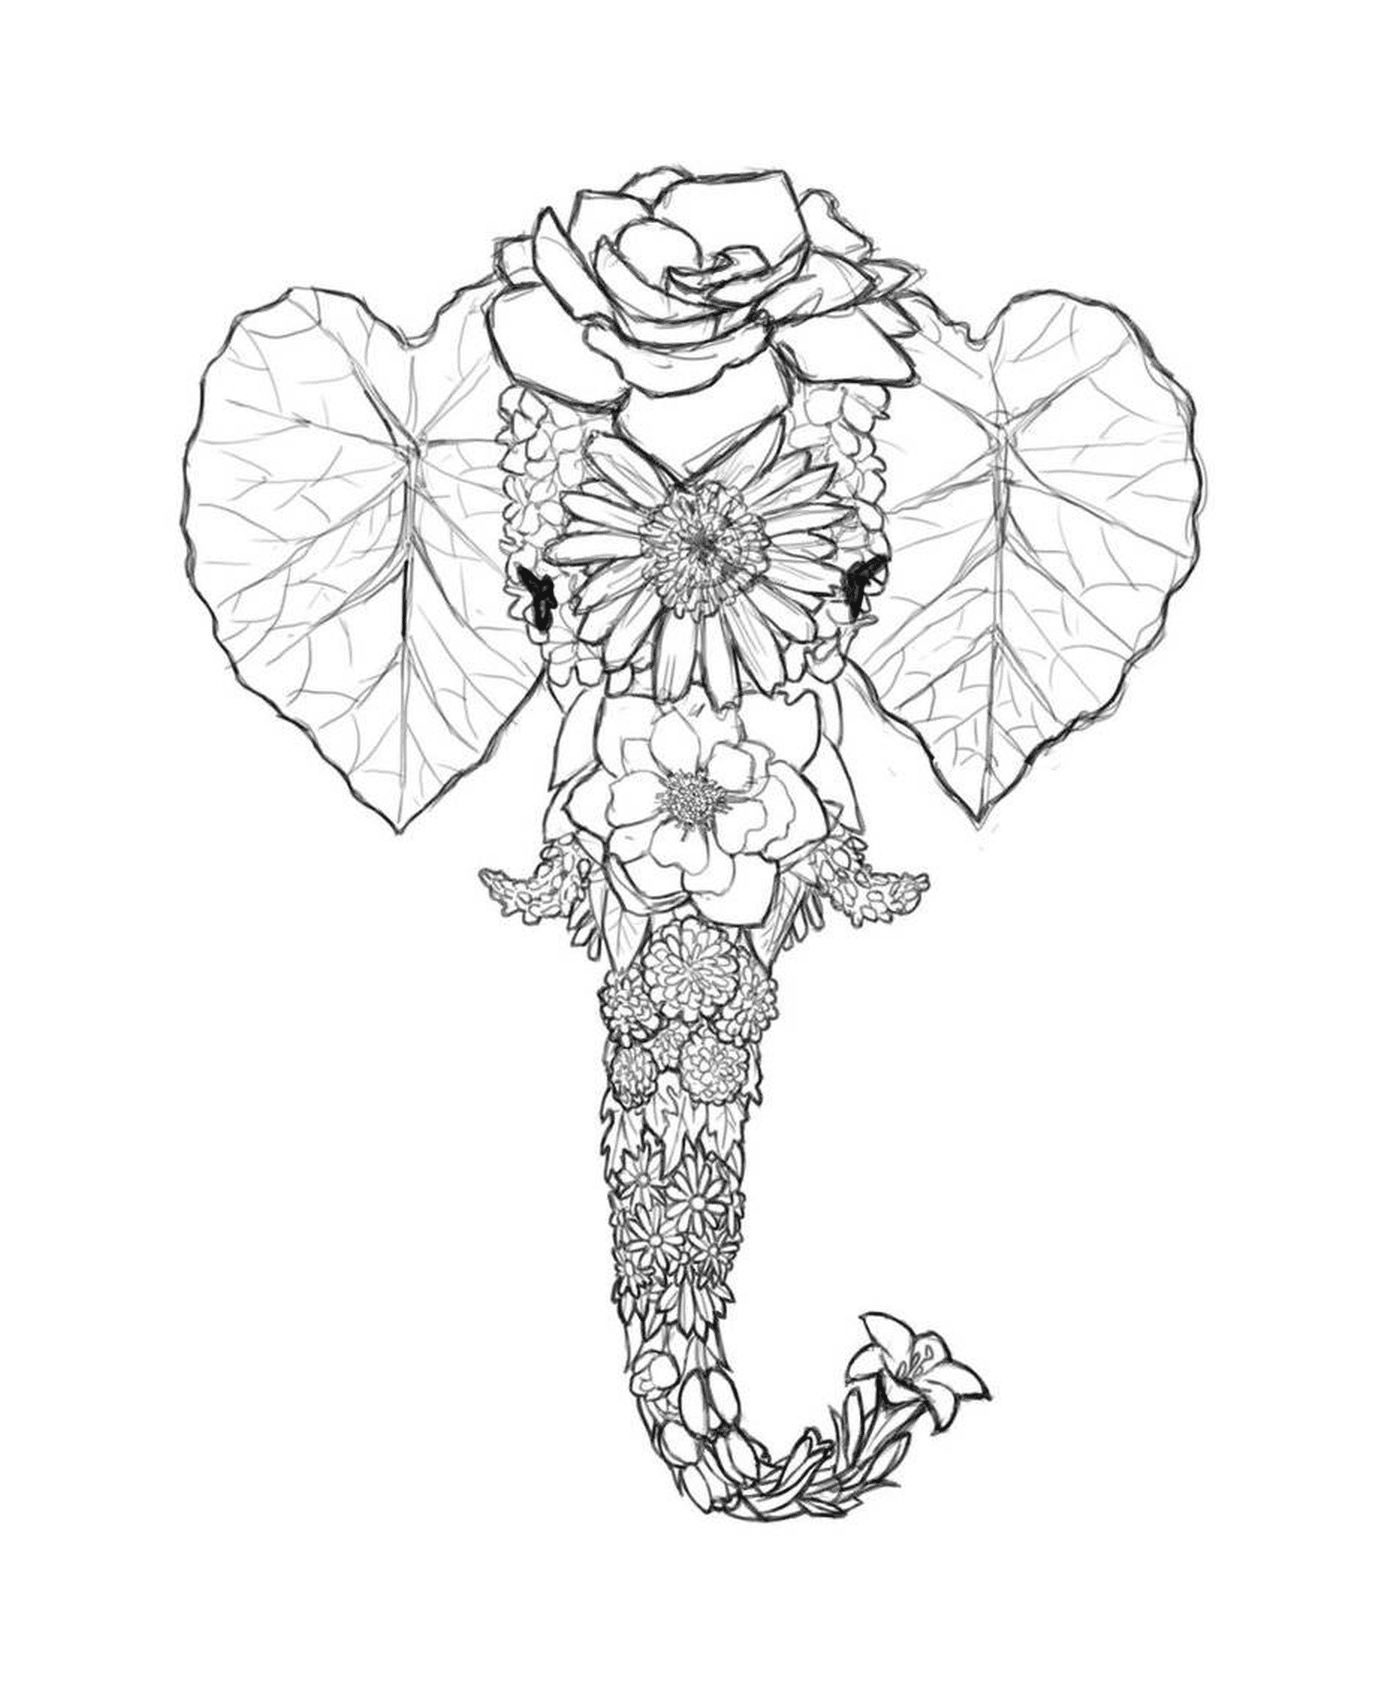  An elephant with a rose and a flower on its trunk 